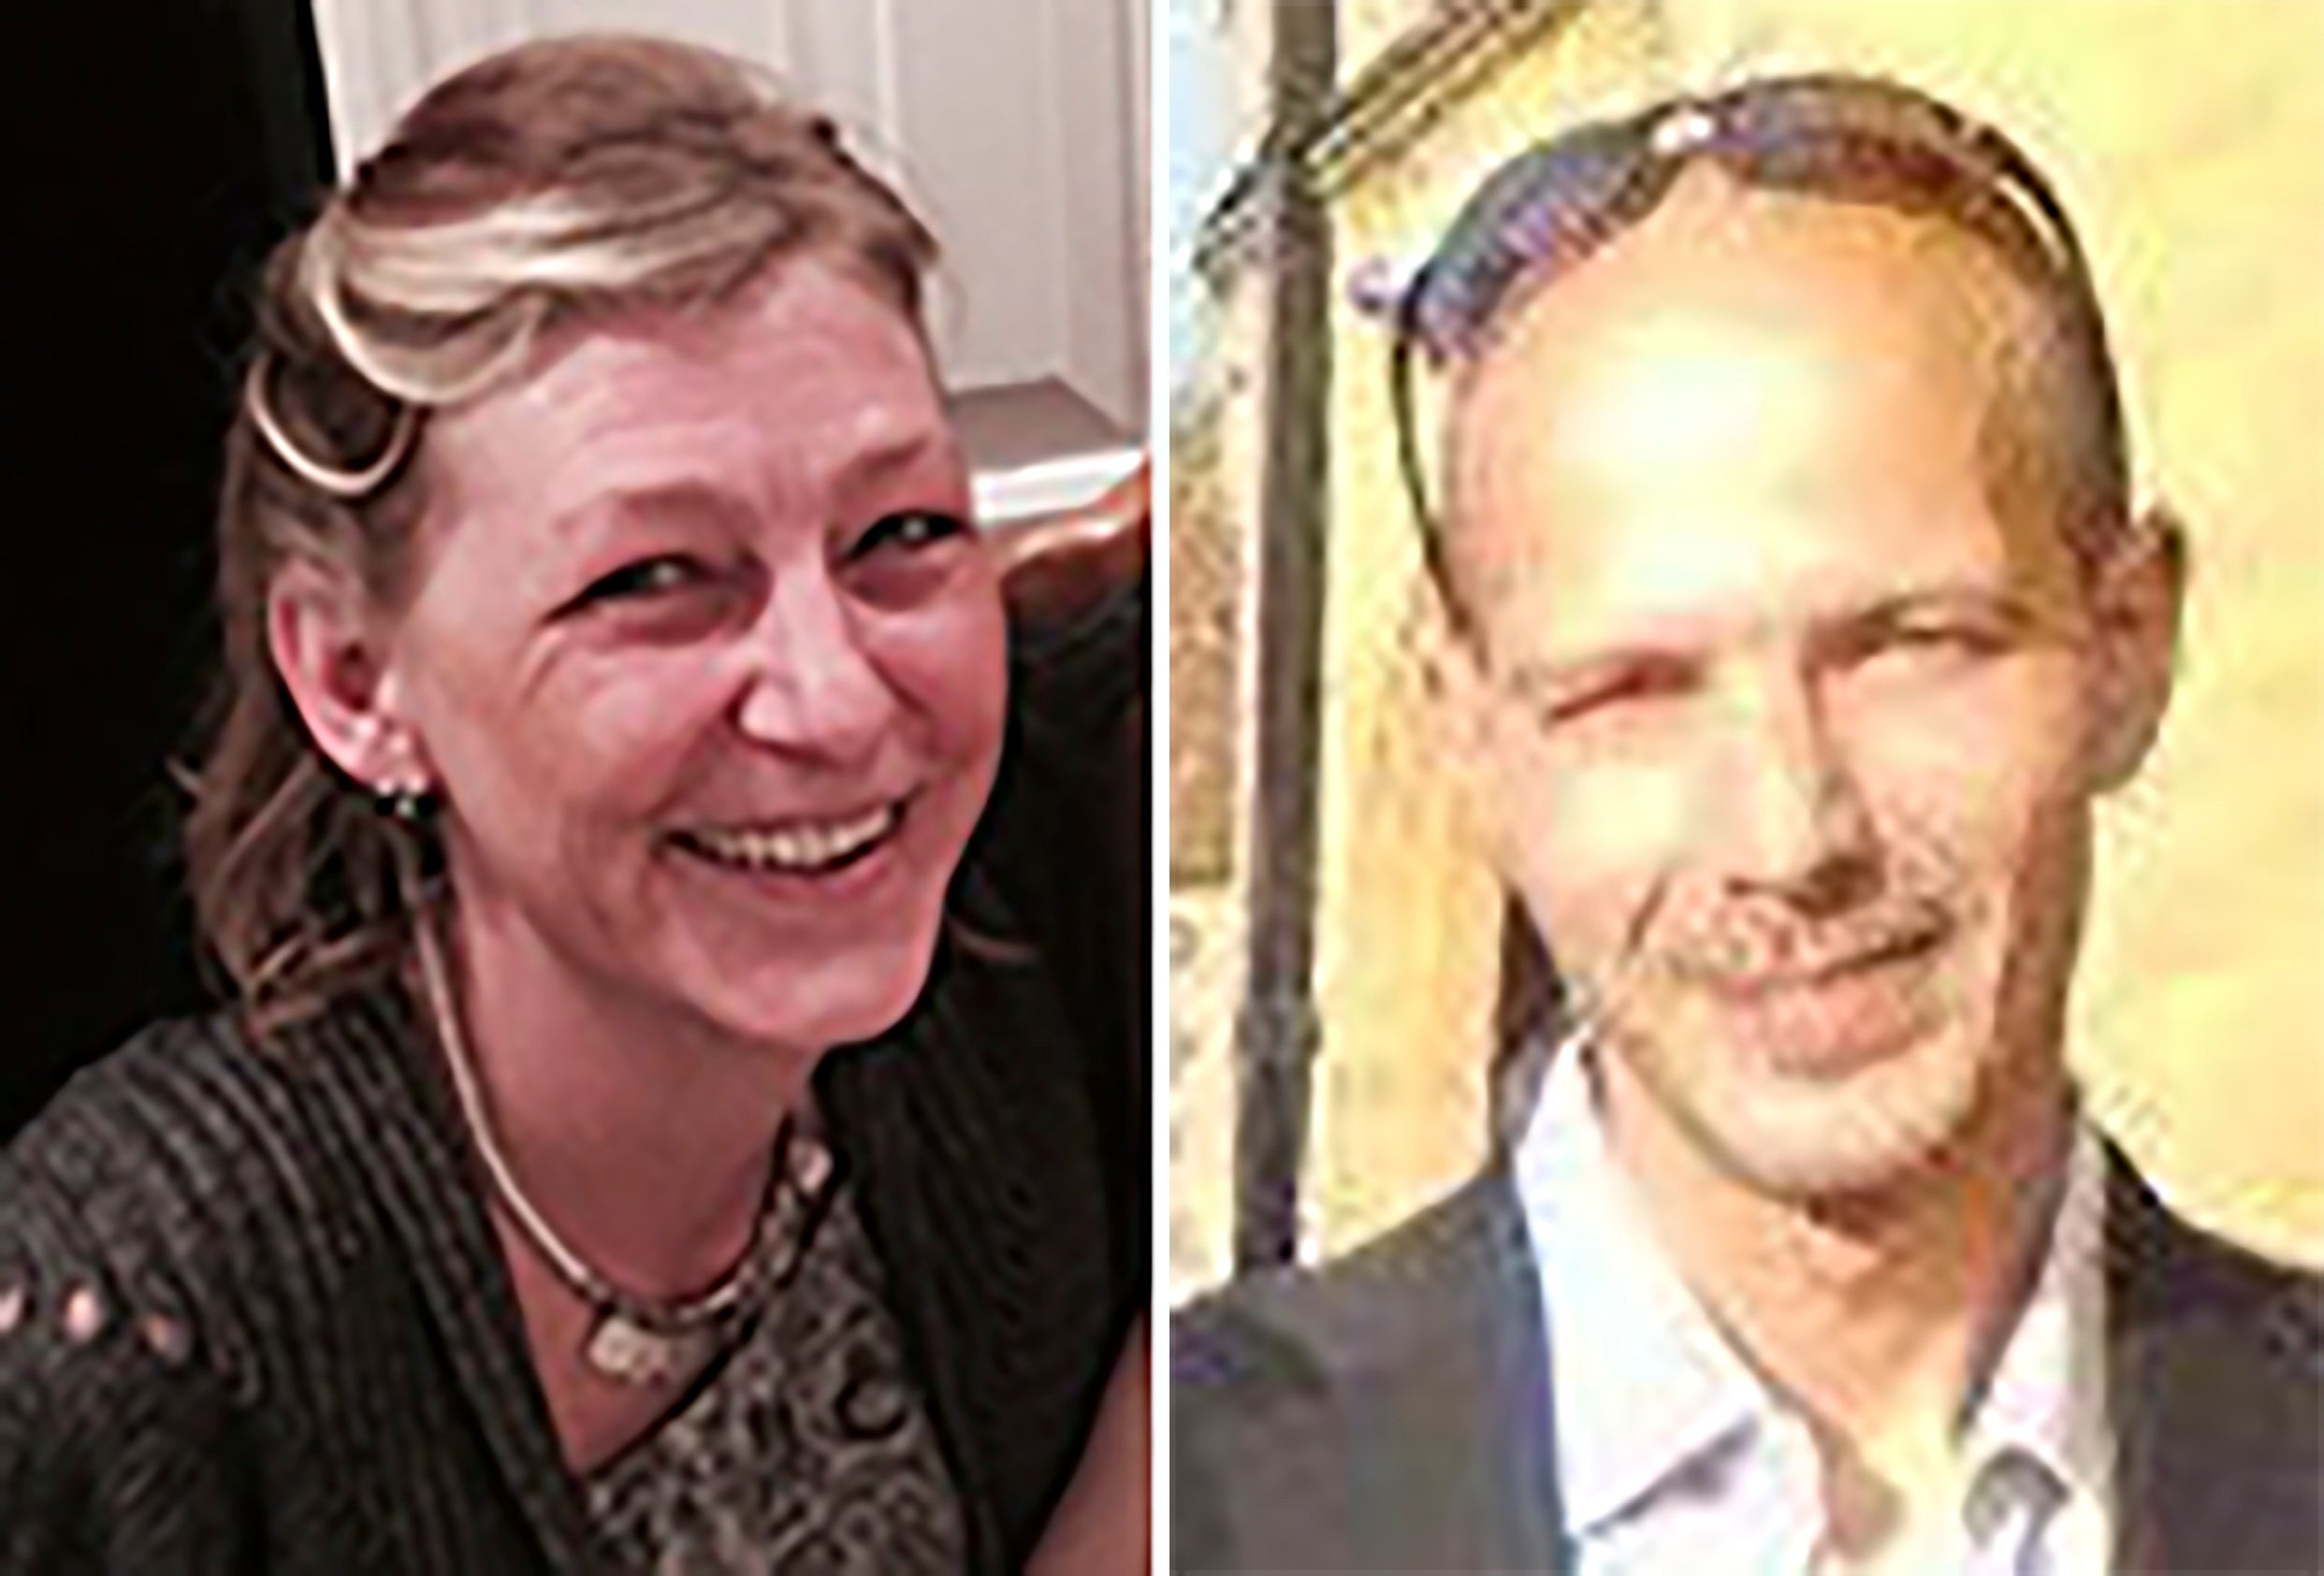 Dawn Sturgess (left) died after partner Charlie Rowley mistakenly gave her the perfume bottle containing novichok as a present